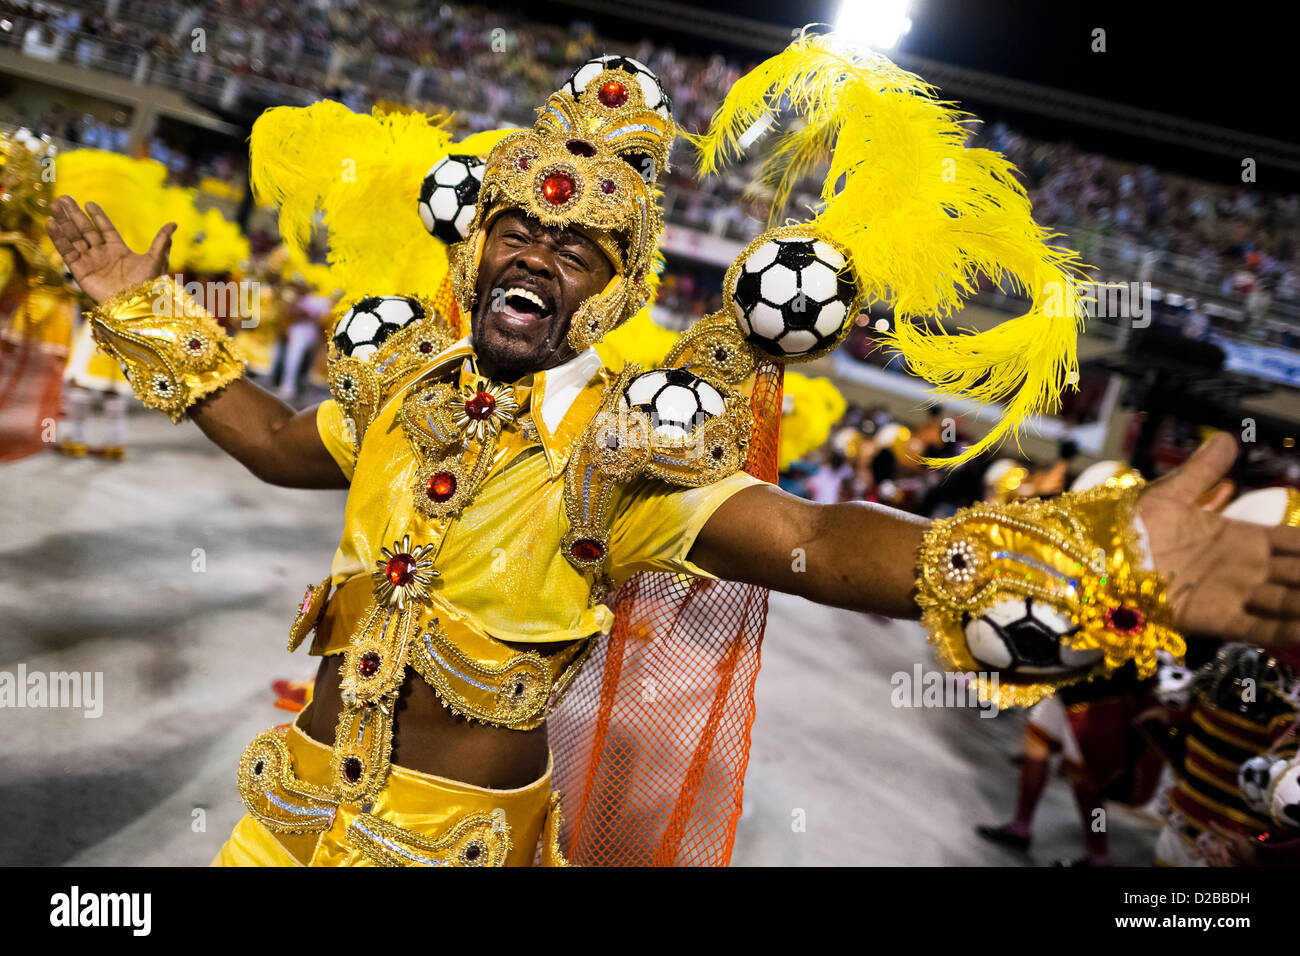 https://c8.alamy.com/comp/D2BBDH/samba-school-dancers-perform-during-the-carnival-access-group-parade-D2BBDH.jpg